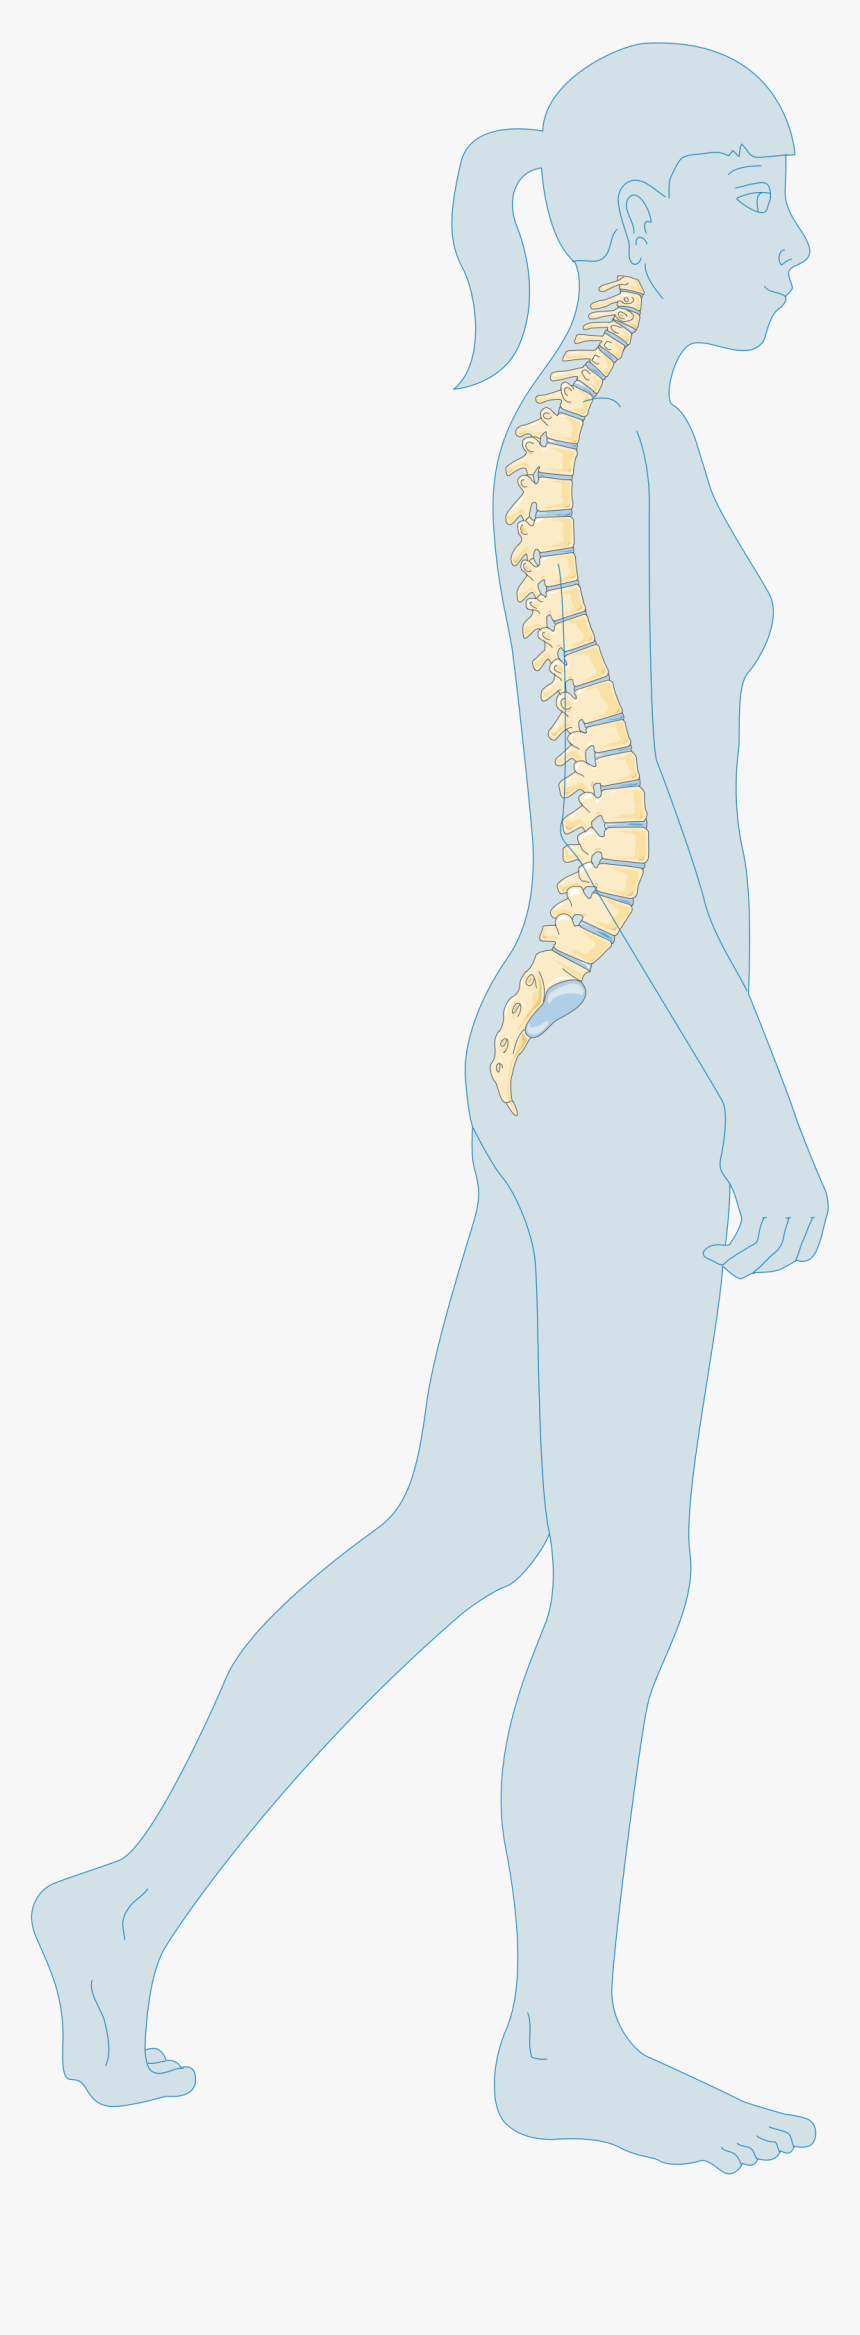 Child Teenager 3 Smart Servier - Osteoporosis, HD Png Download, Free Download